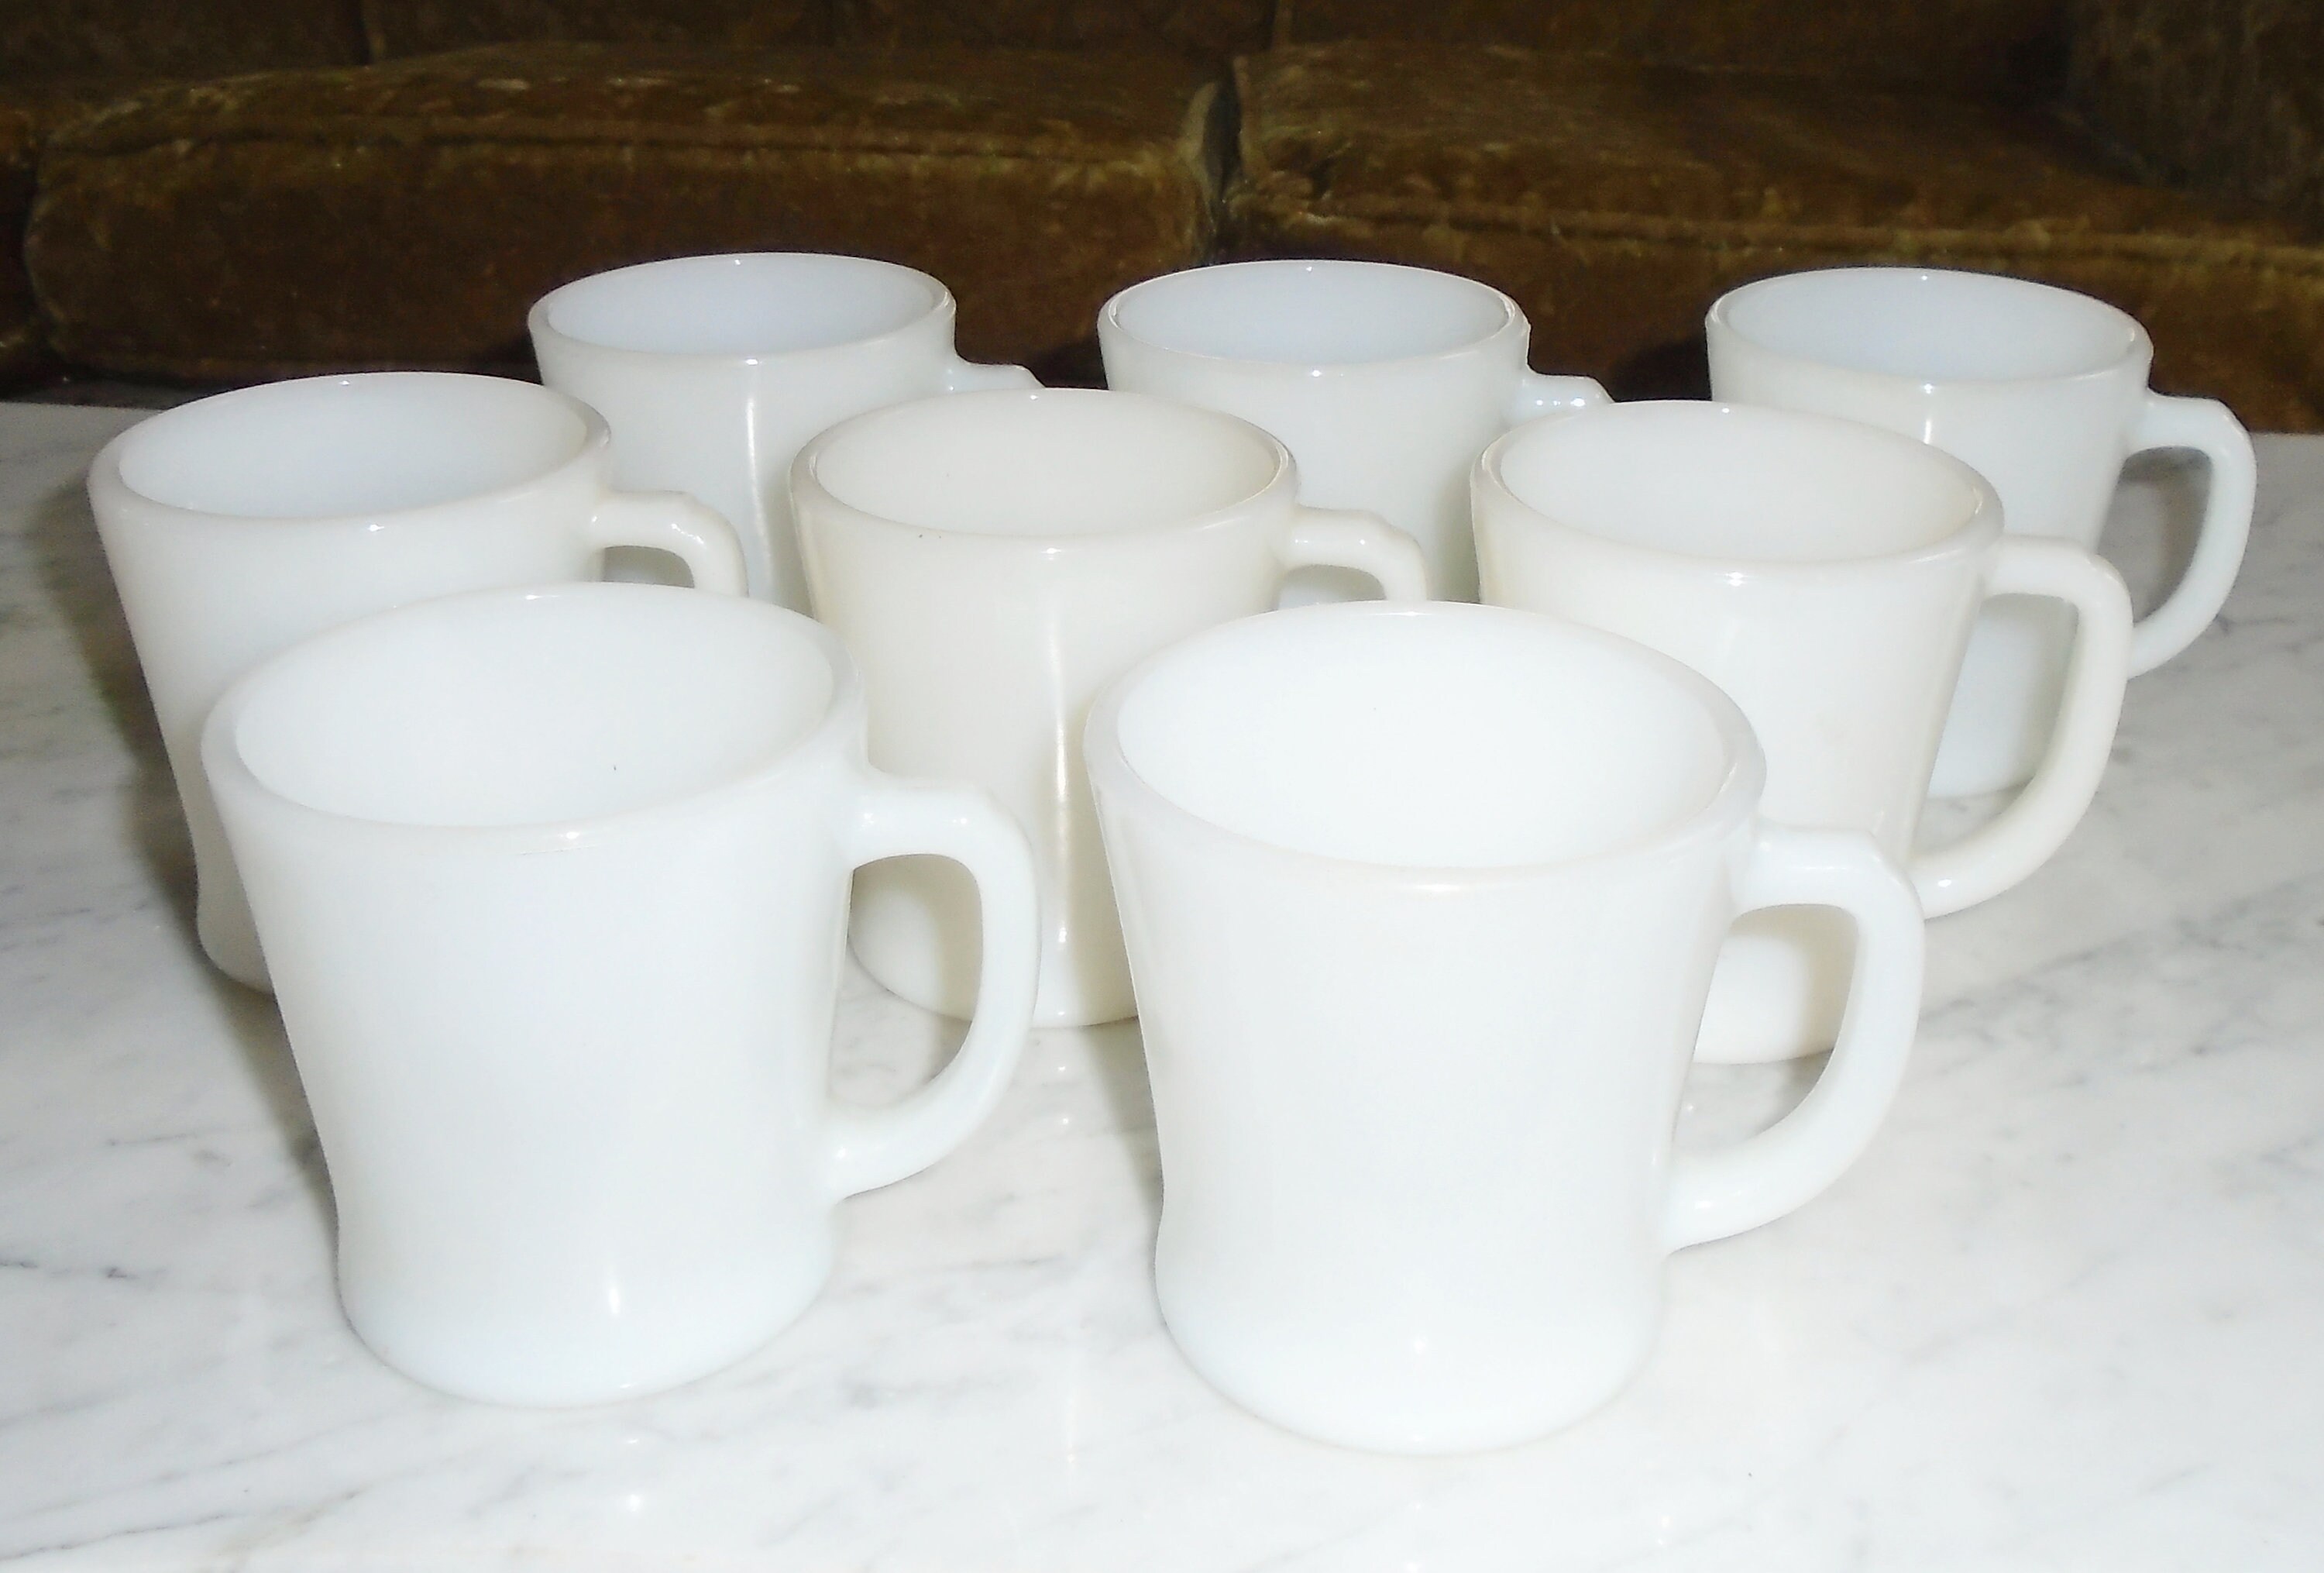 Lot of 4 Vintage White Milk Glass D-Handle Coffee Cups Mugs VGC